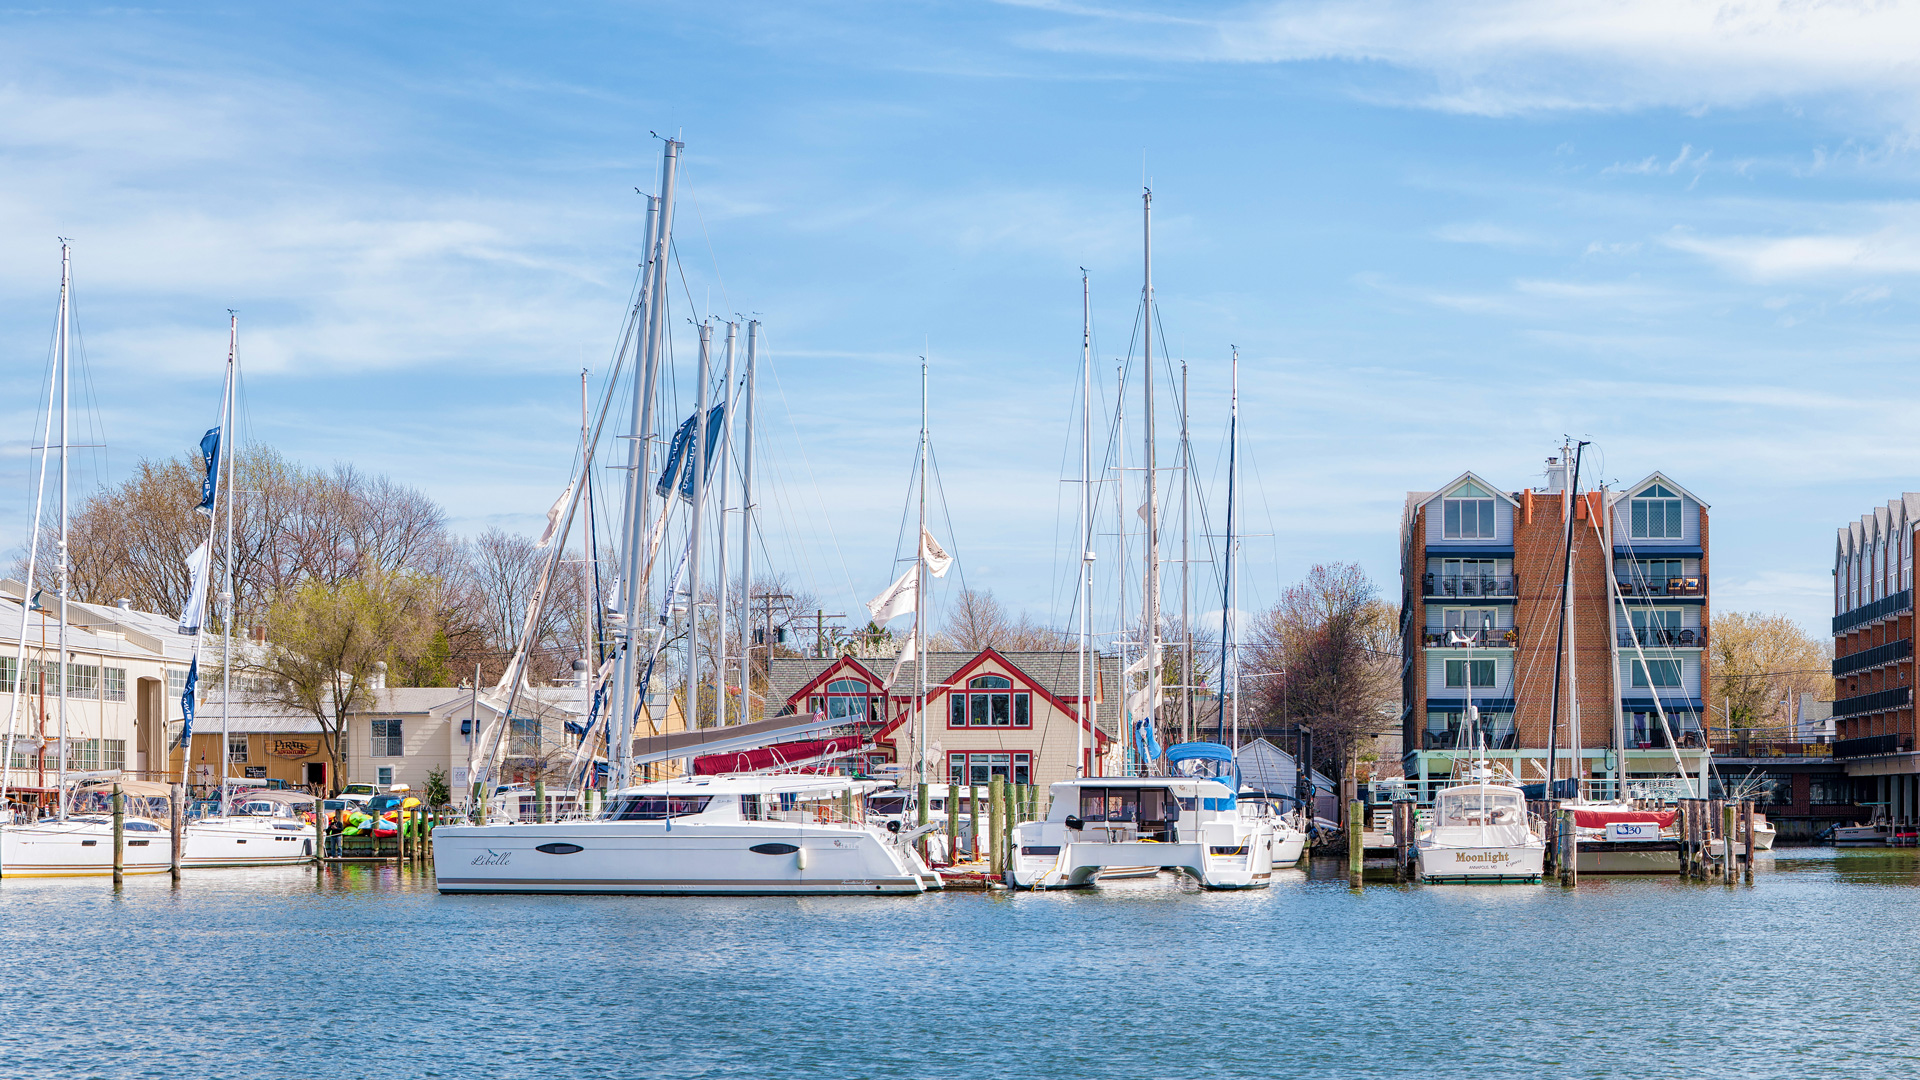 Boats and waterfront buildings at 310 Third Street in Annapolis, Maryland